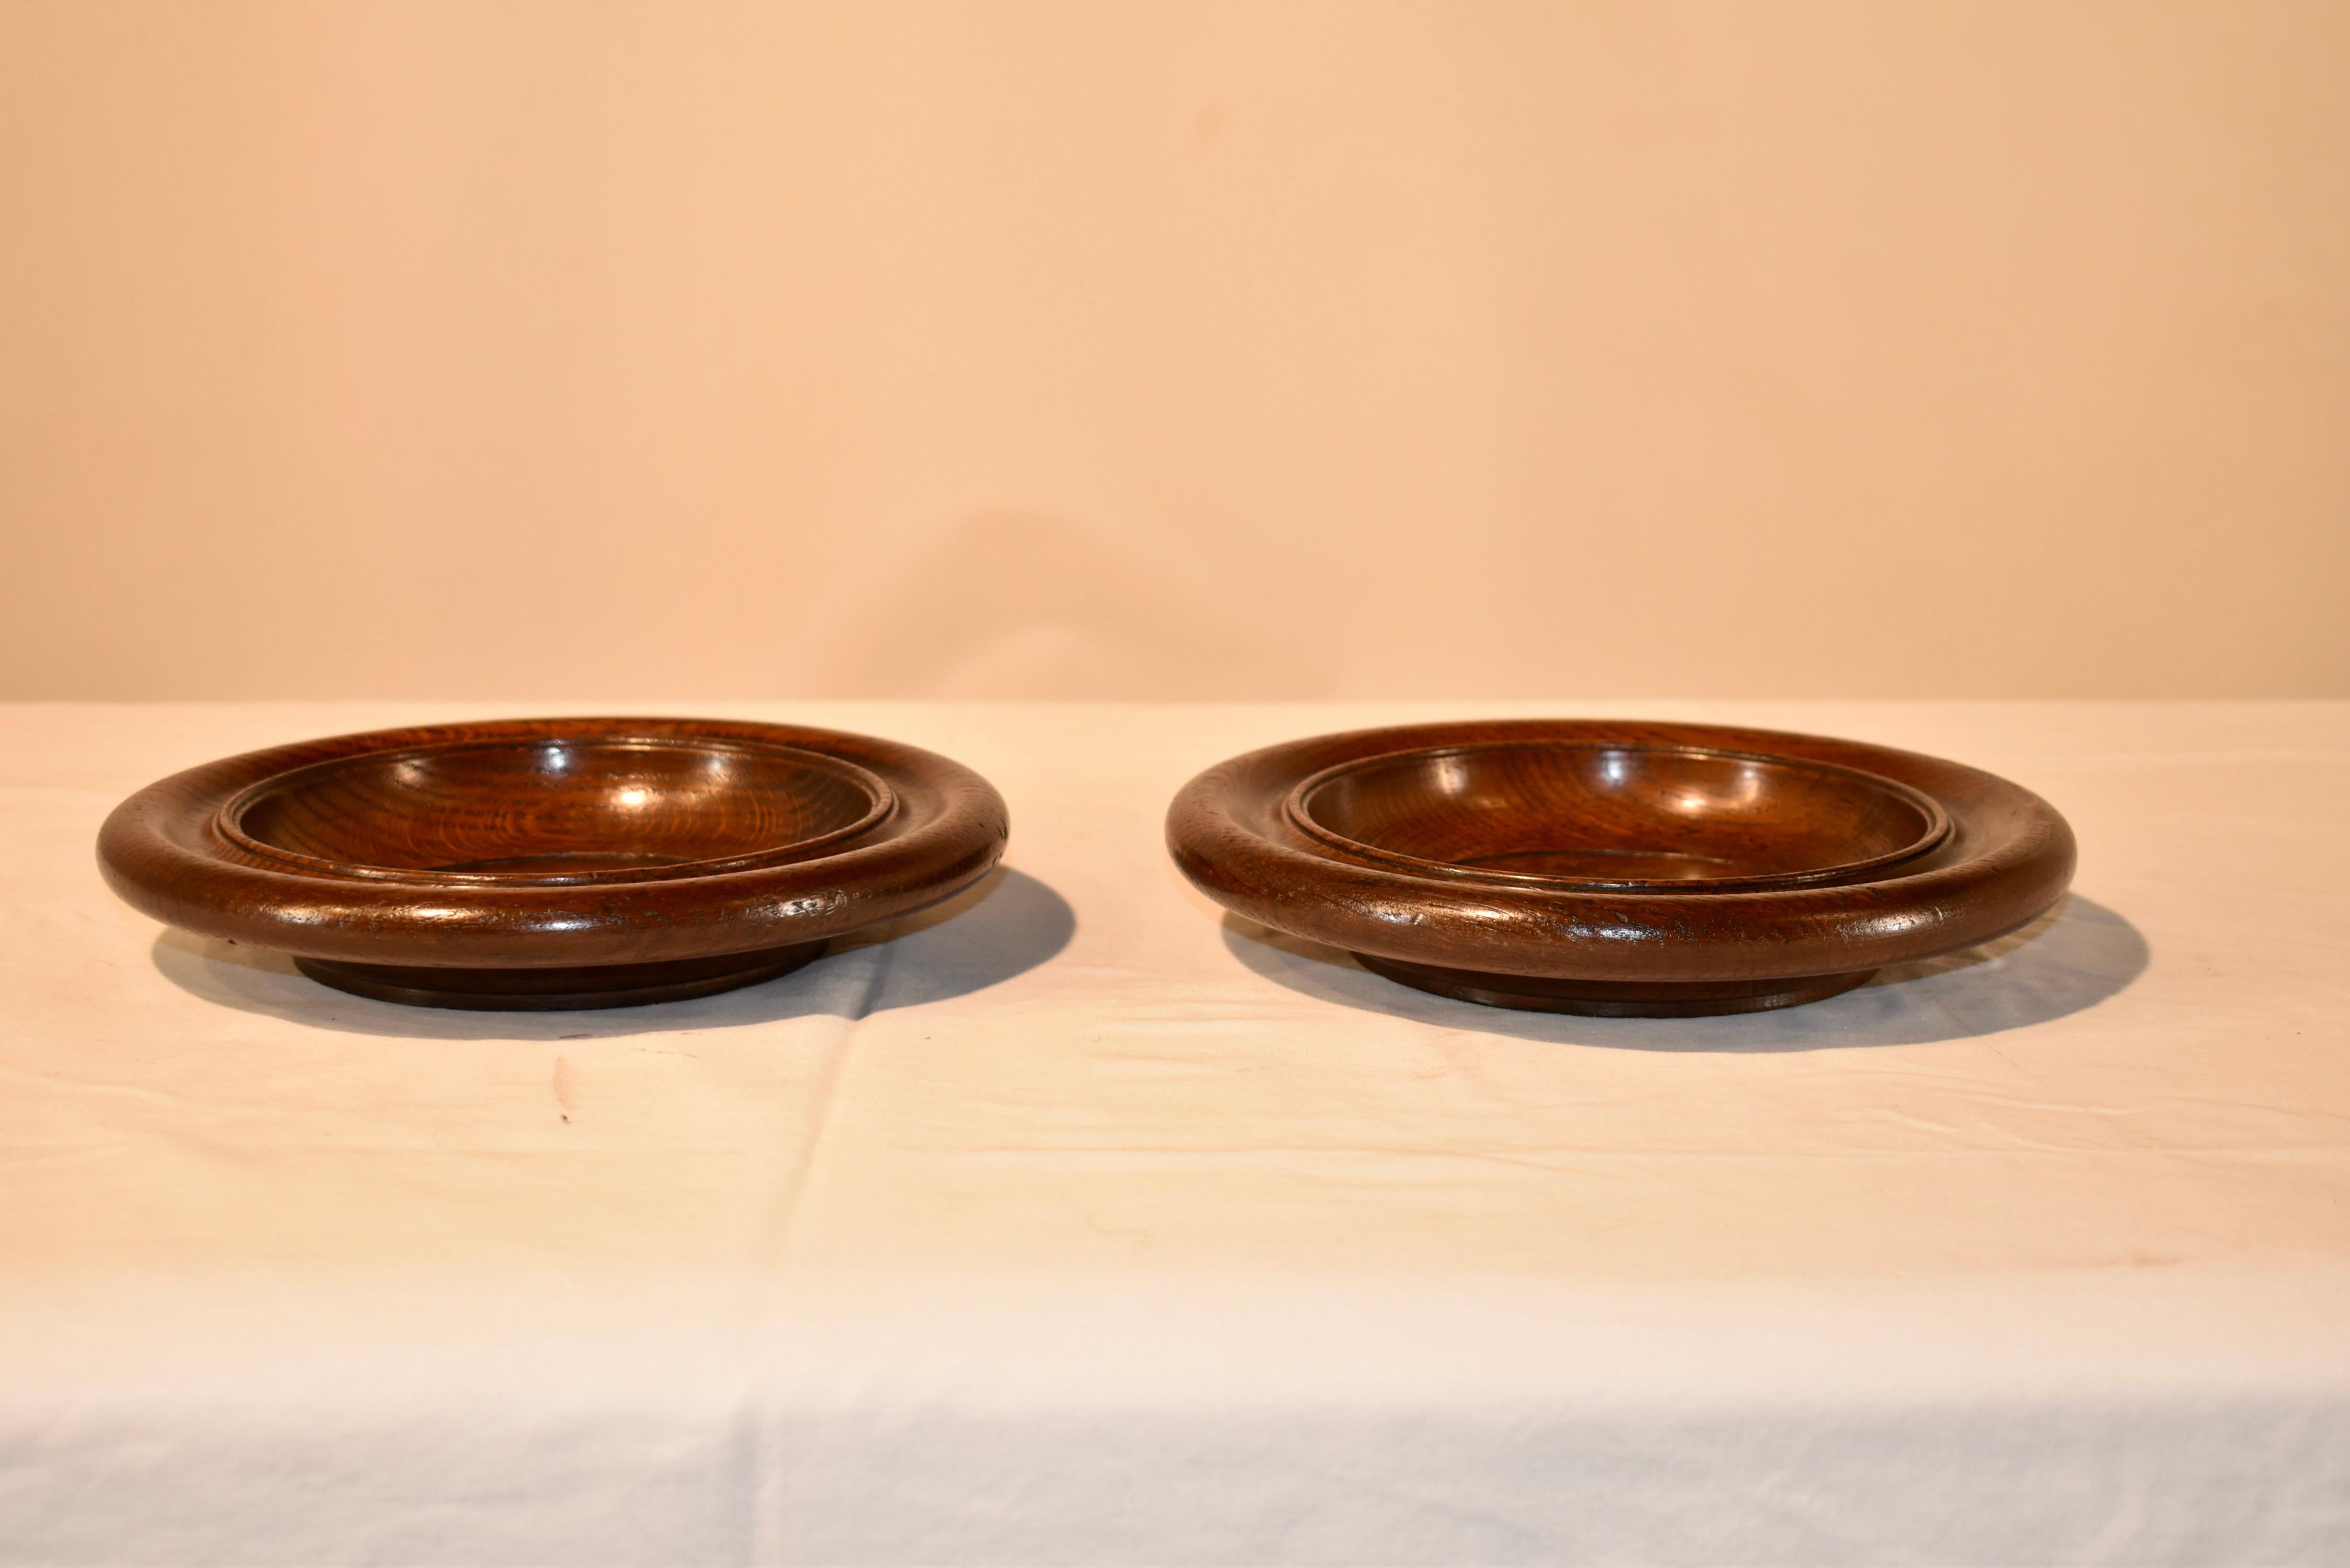 Pair of Edwardian oak turned wine coasters or shallow bowls which are wonderfully hand turned. Lovely accent for many areas in the home.